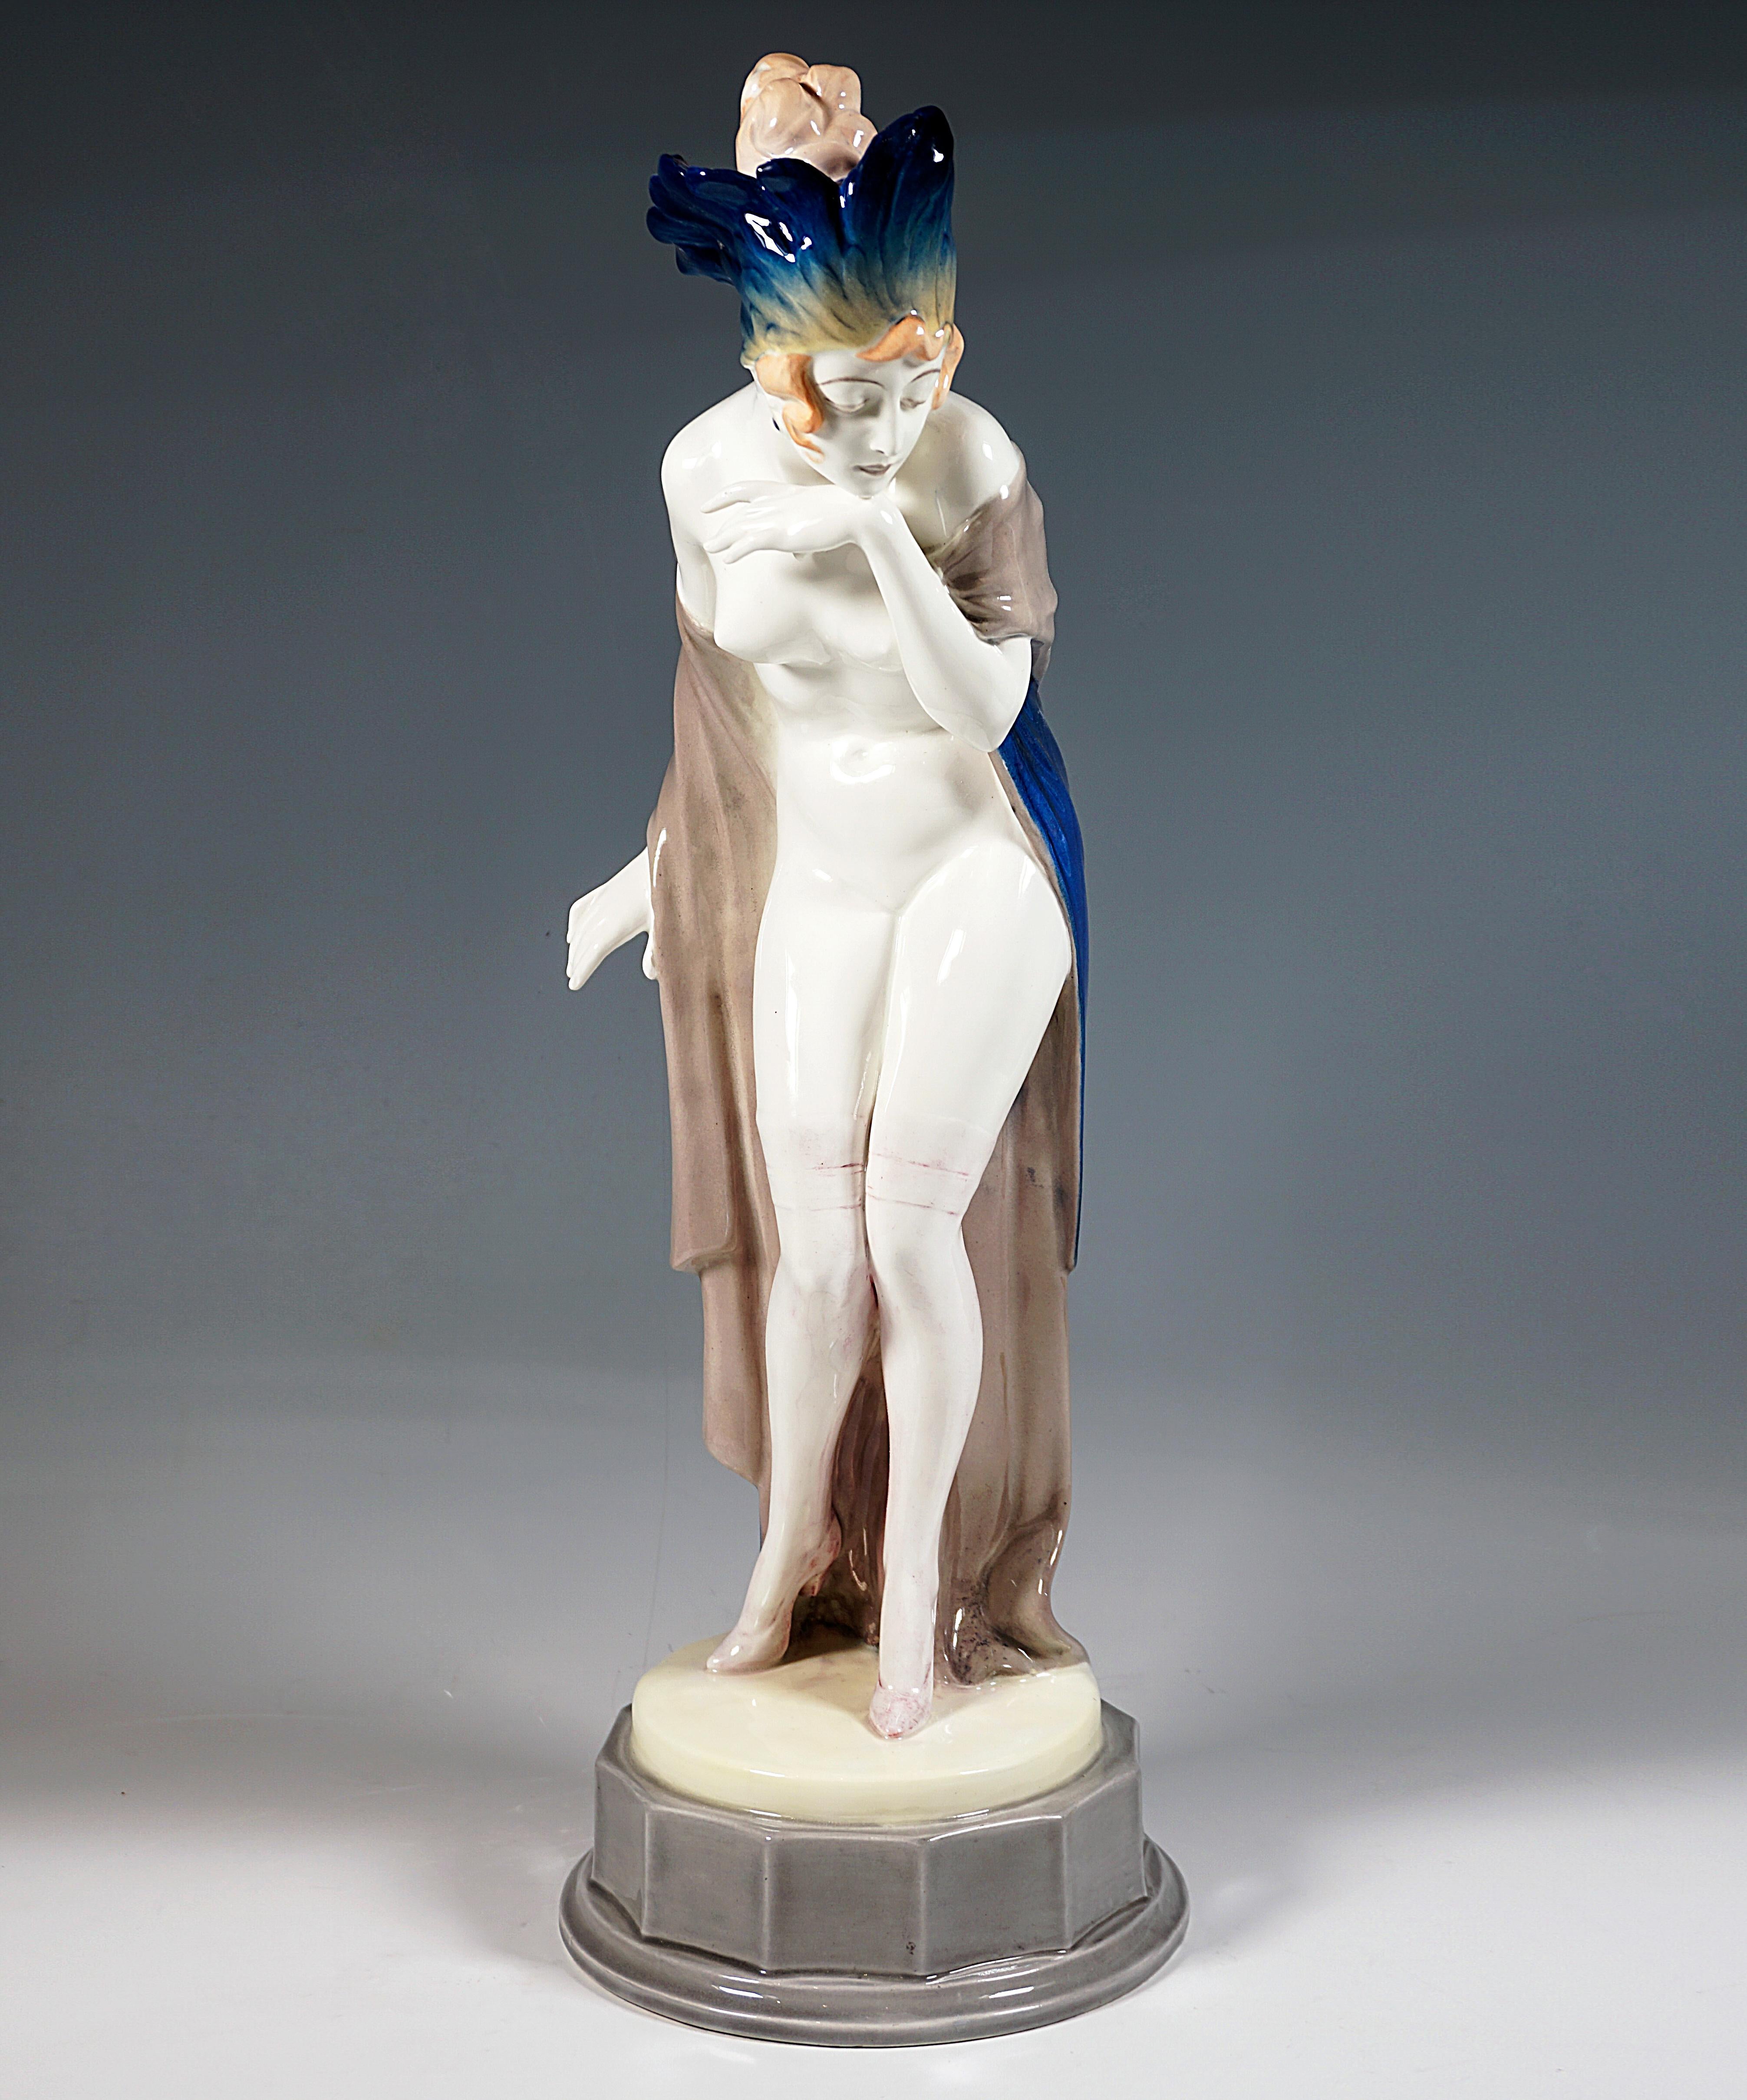 Impressive Goldscheider Vienna Ceramic Figurine of the 1920s:
The young lady with artfully pinned hair wears only transparent stockings and high heels, as well as a headdress densely decorated with blue-yellow shaded feathers, a blue cloth reaching